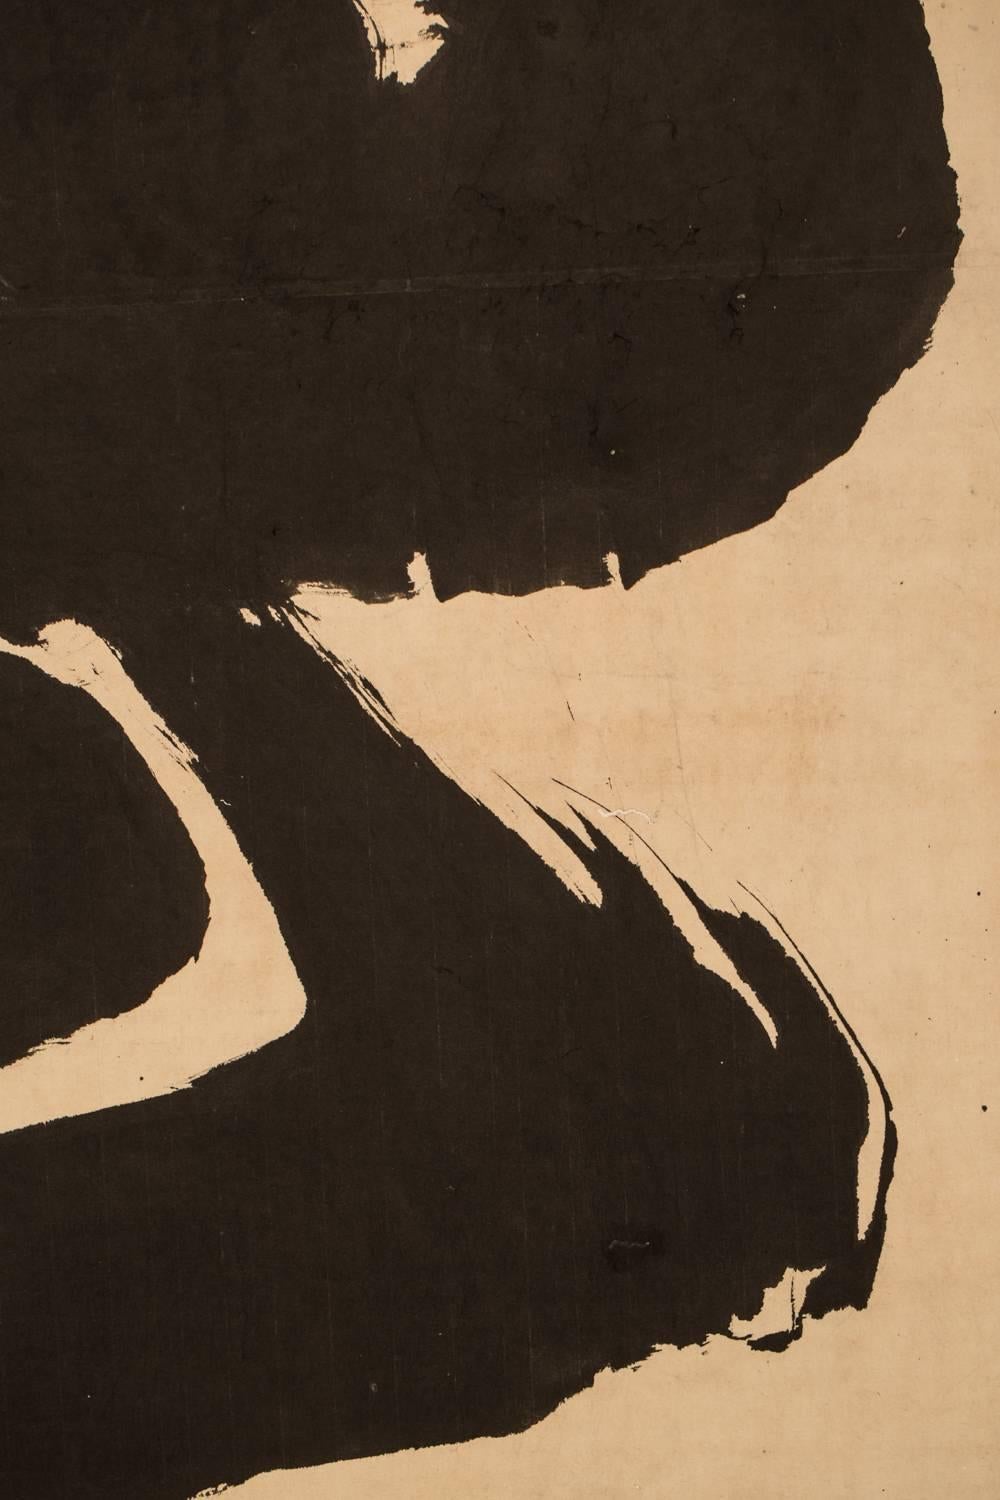 Meiji period (1868 - 1912) calligraphy painting.  Abstract character reads: Kumo (cloud).  Seal on the upper right reads Shogazen, seal on the upper left reads Hosai.  Ink on mulberry paper with gold leaf border.